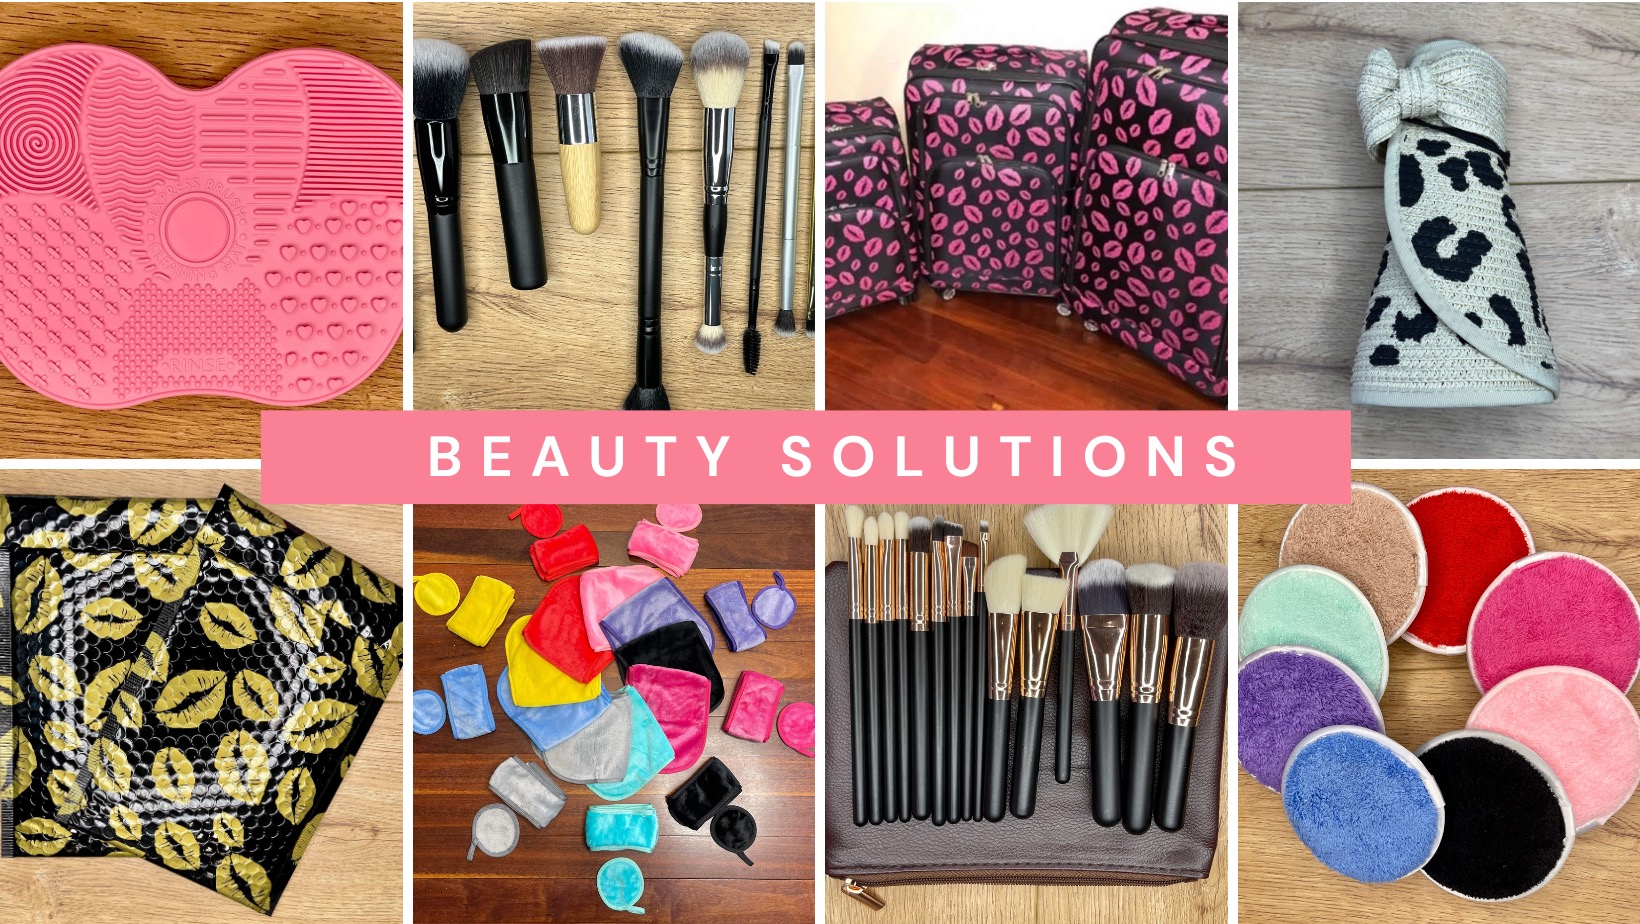 Beauty solutions